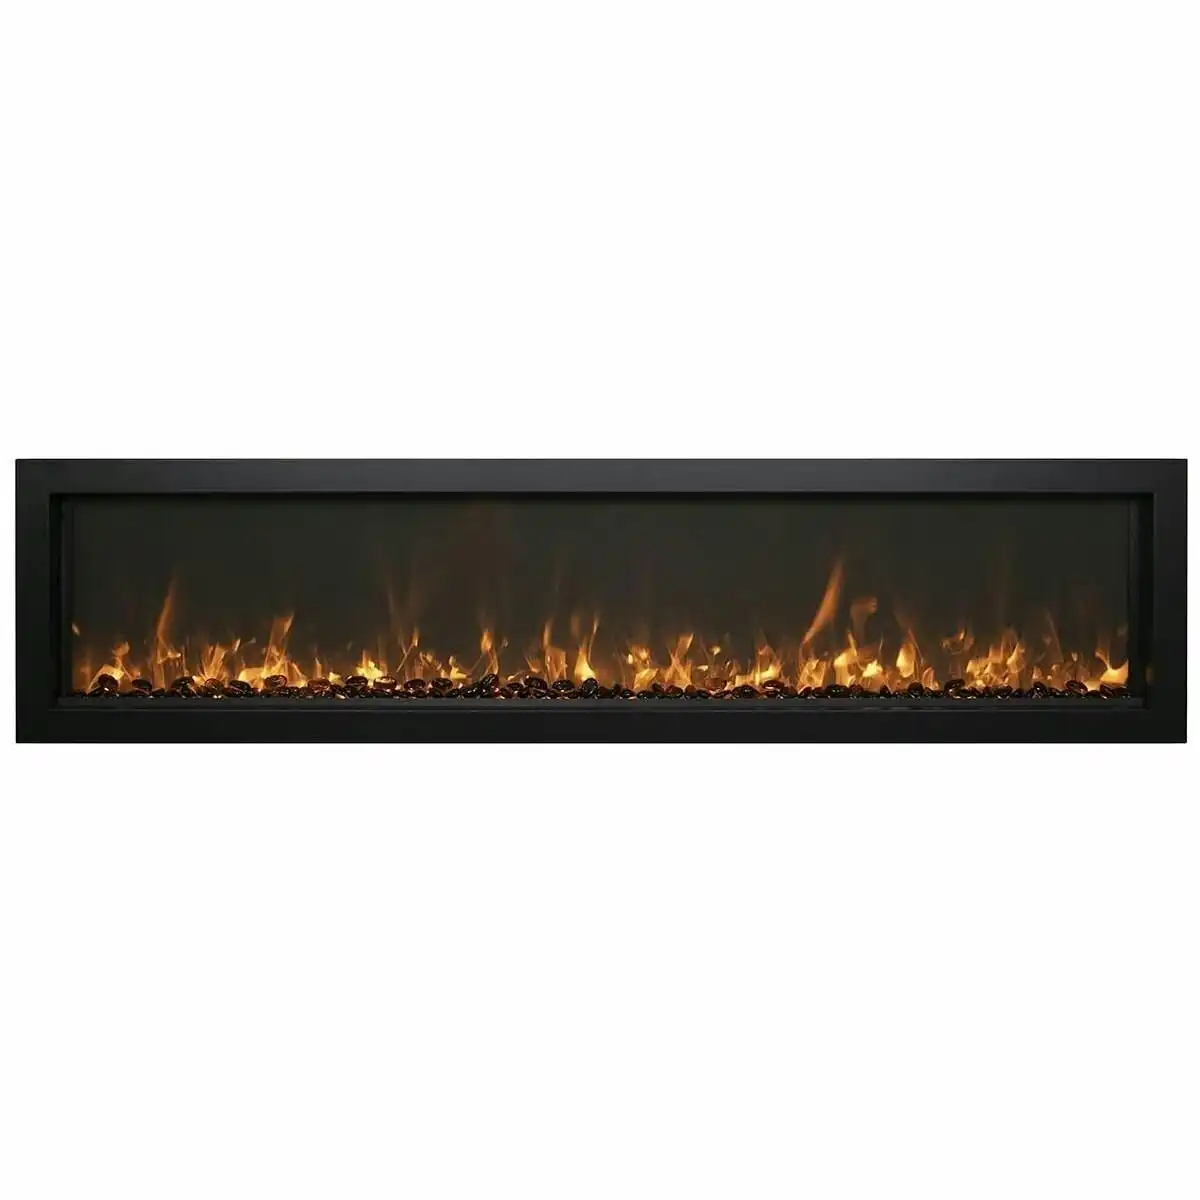 Remii 55 Inch Extra Slim Indoor Built In Electric Fireplace with Black Steel Surround